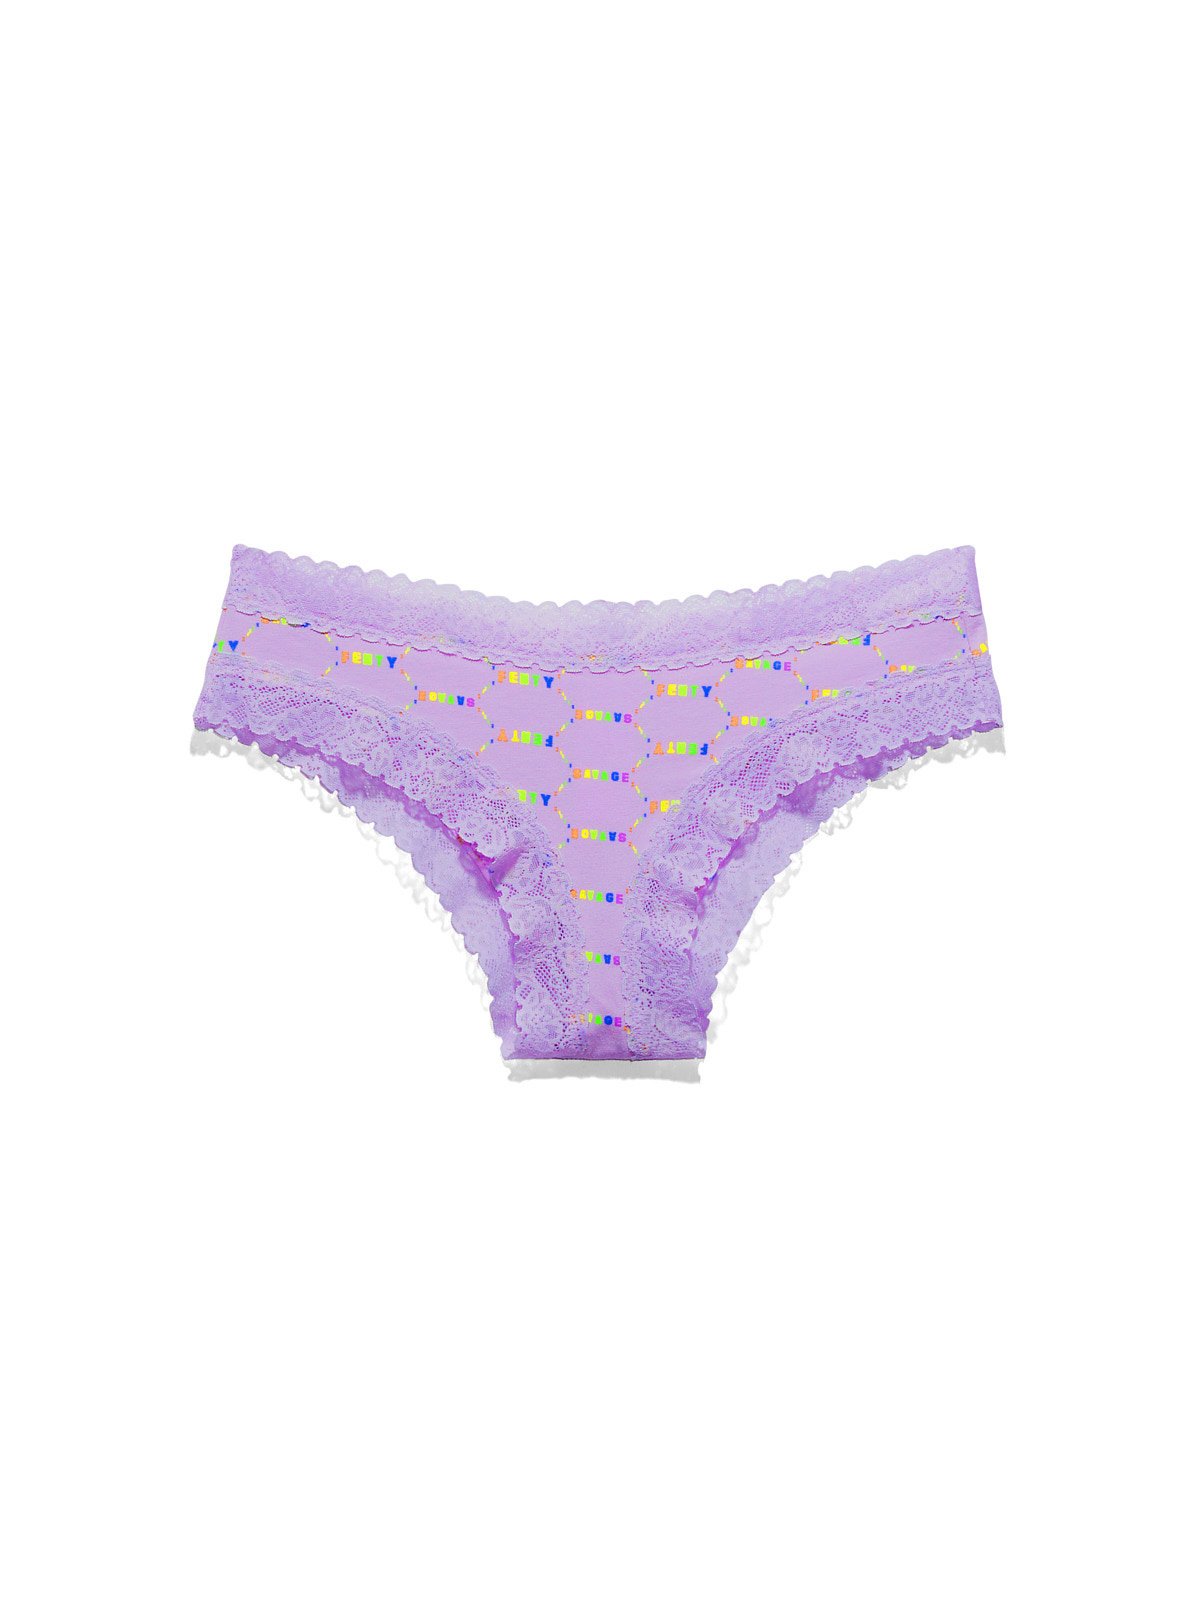 Gianna Cotton Violet Panties  From Cheeky Cuts to Briefs, 30